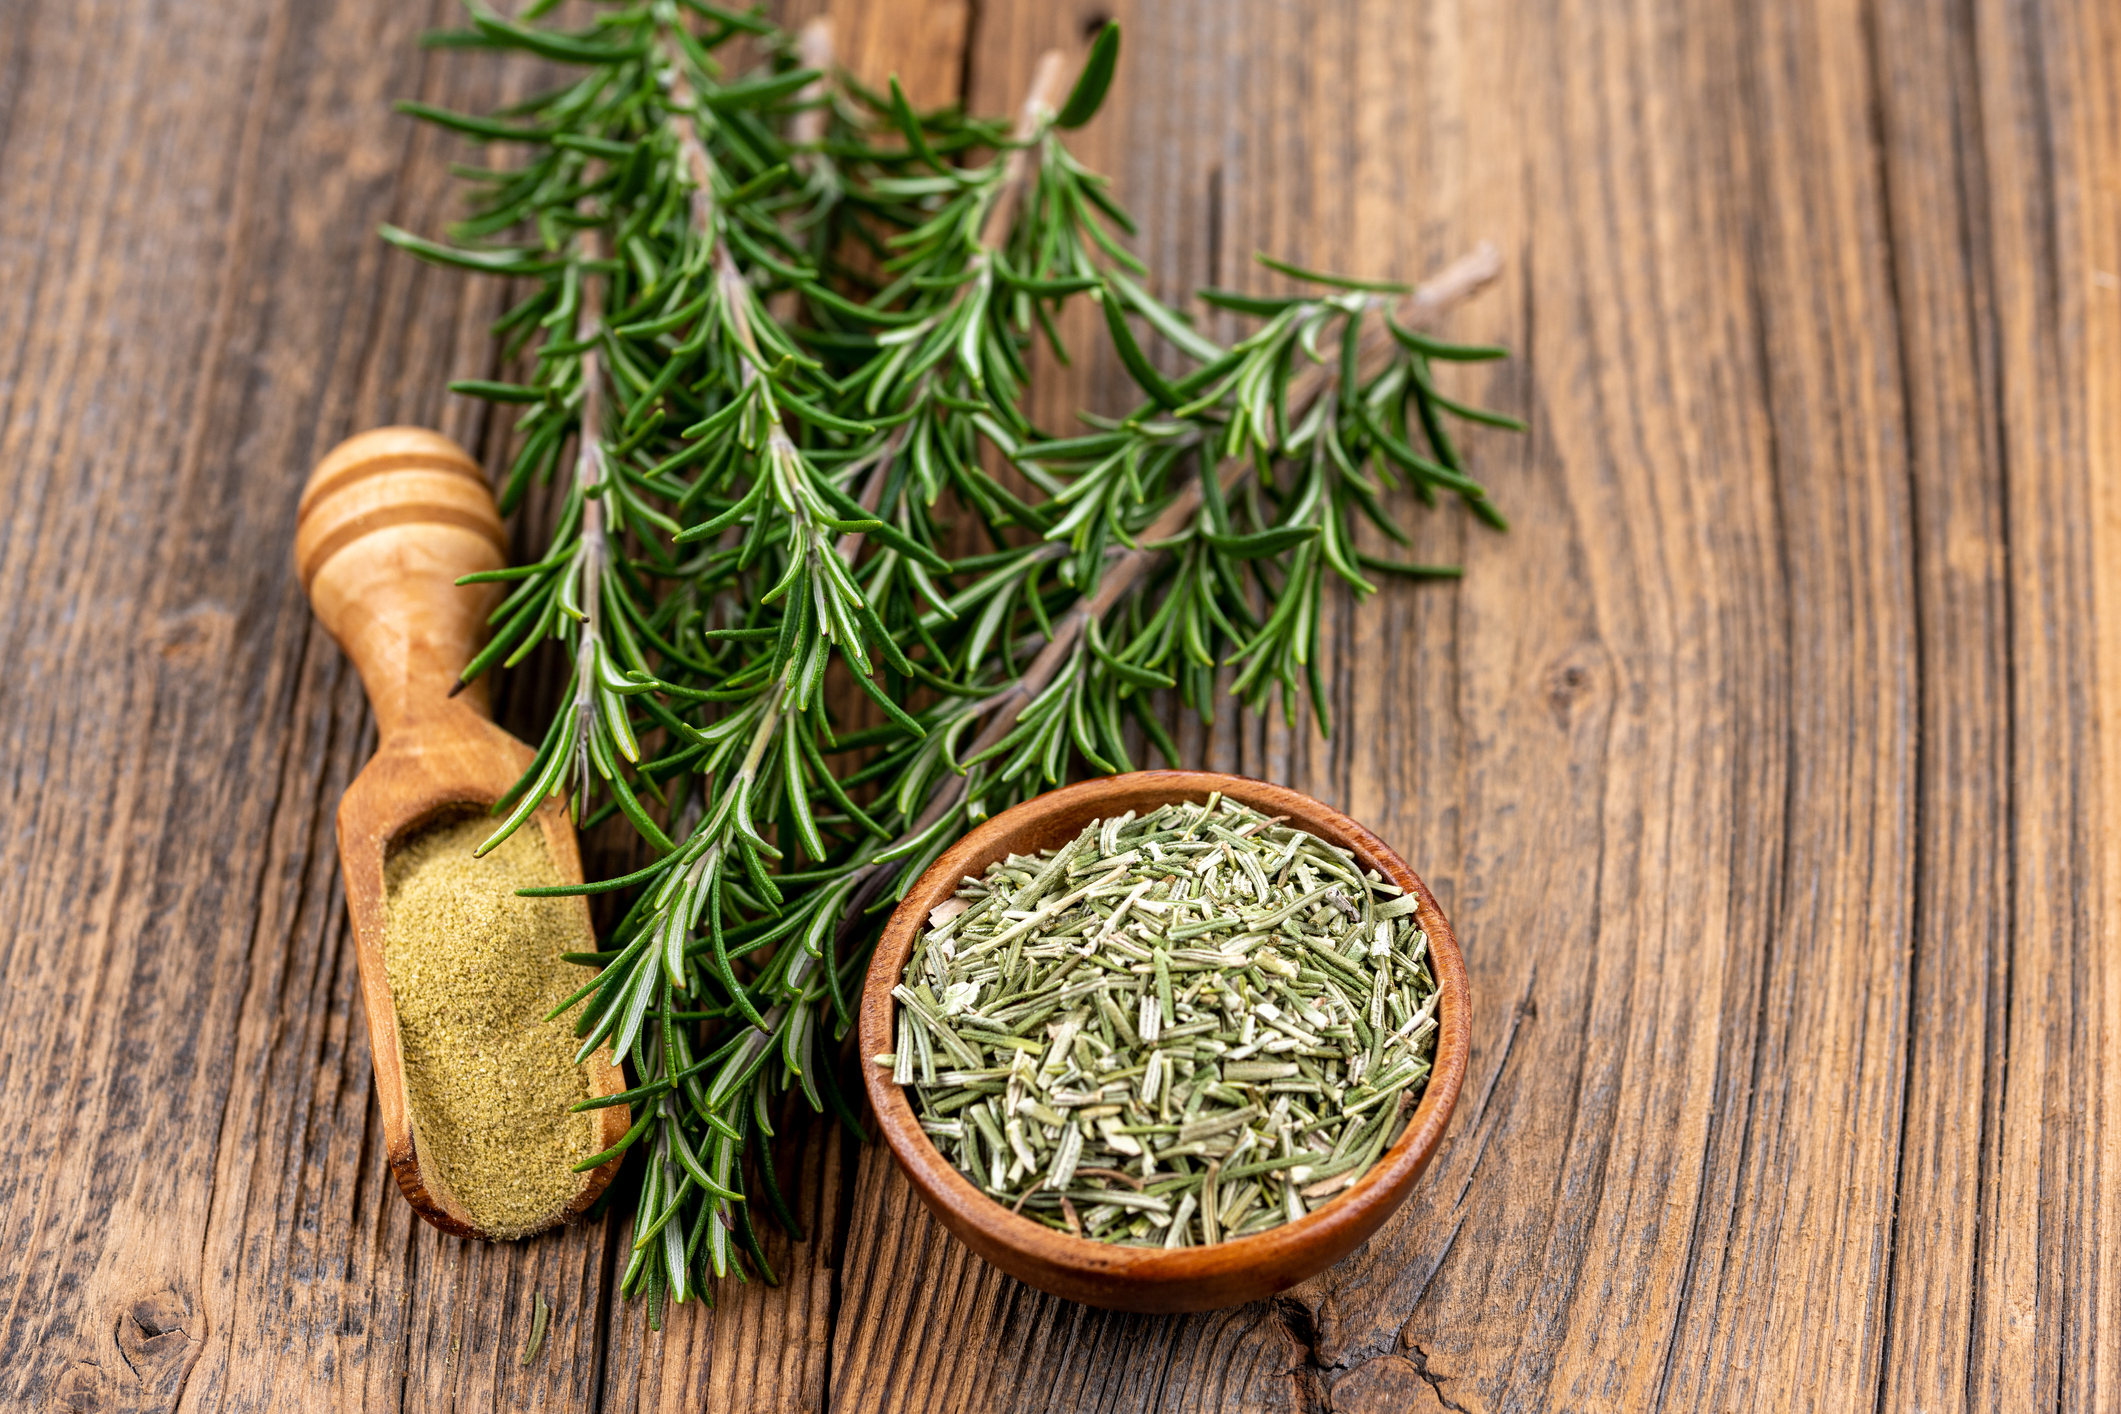 Rosemary: Old-fashioned herb for modern-day ailments